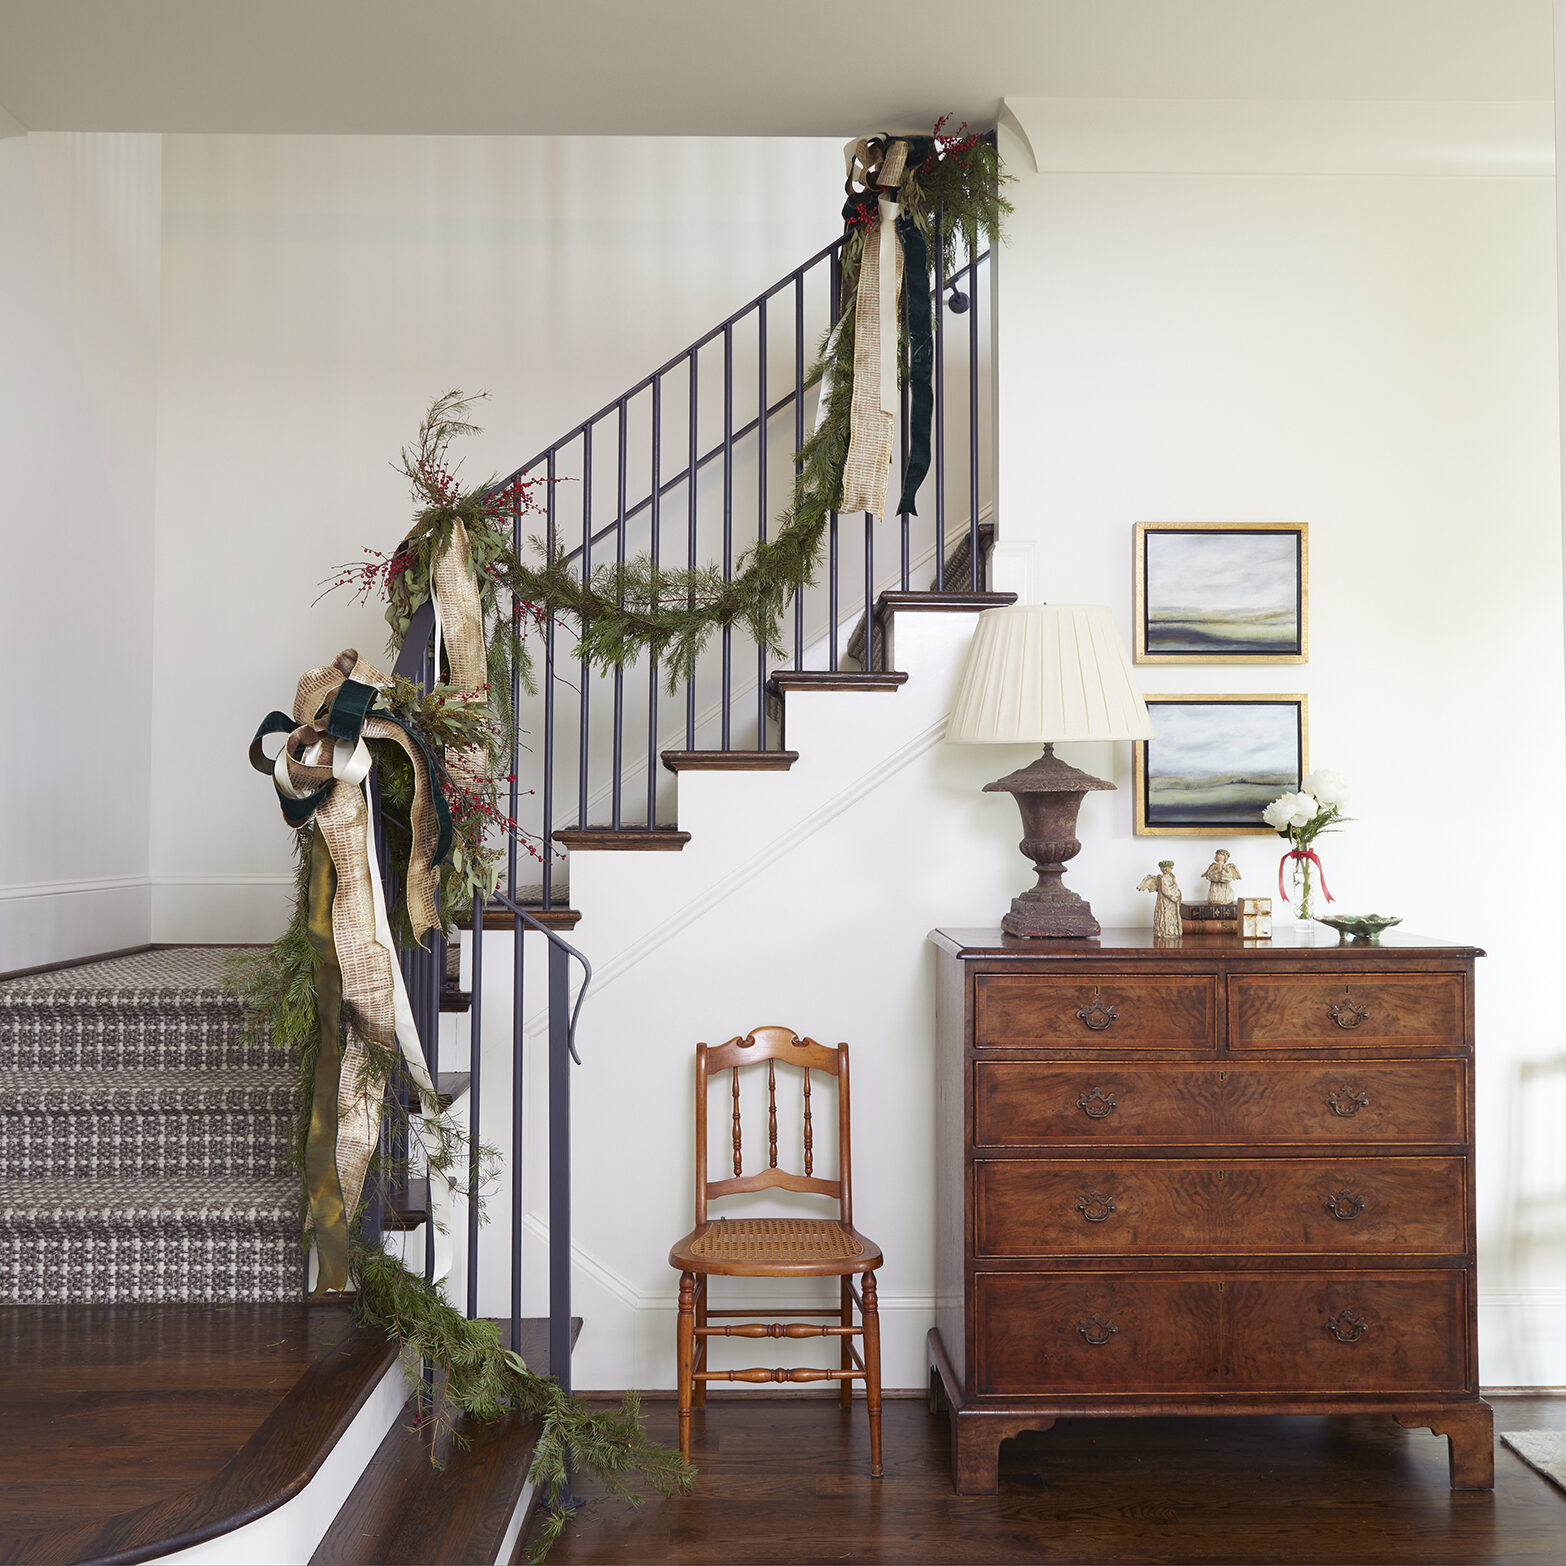 Wrought iron stairway is trimmed in garland accentuated with red berries and green and gold ribbon.